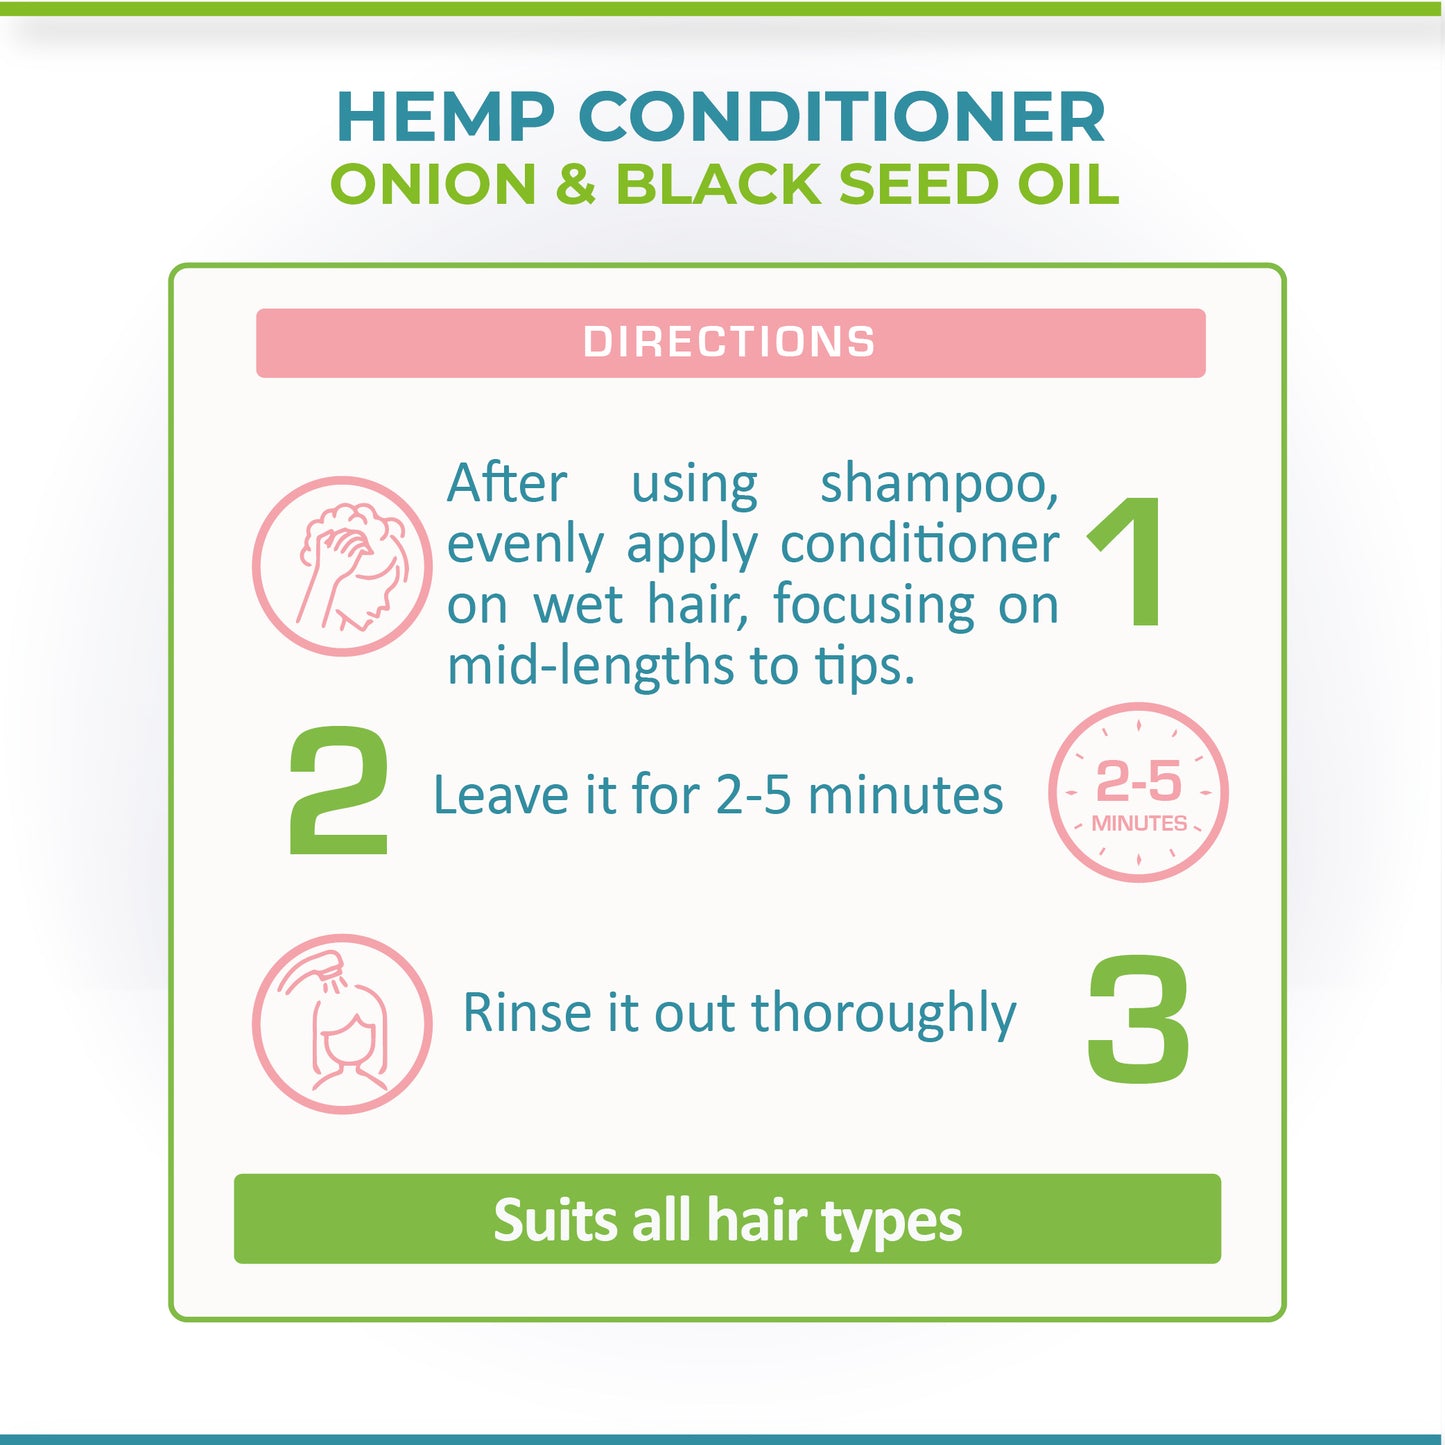 Cure By Design Hemp Black Seed Oil & Onion Conditioner - Hempivate 